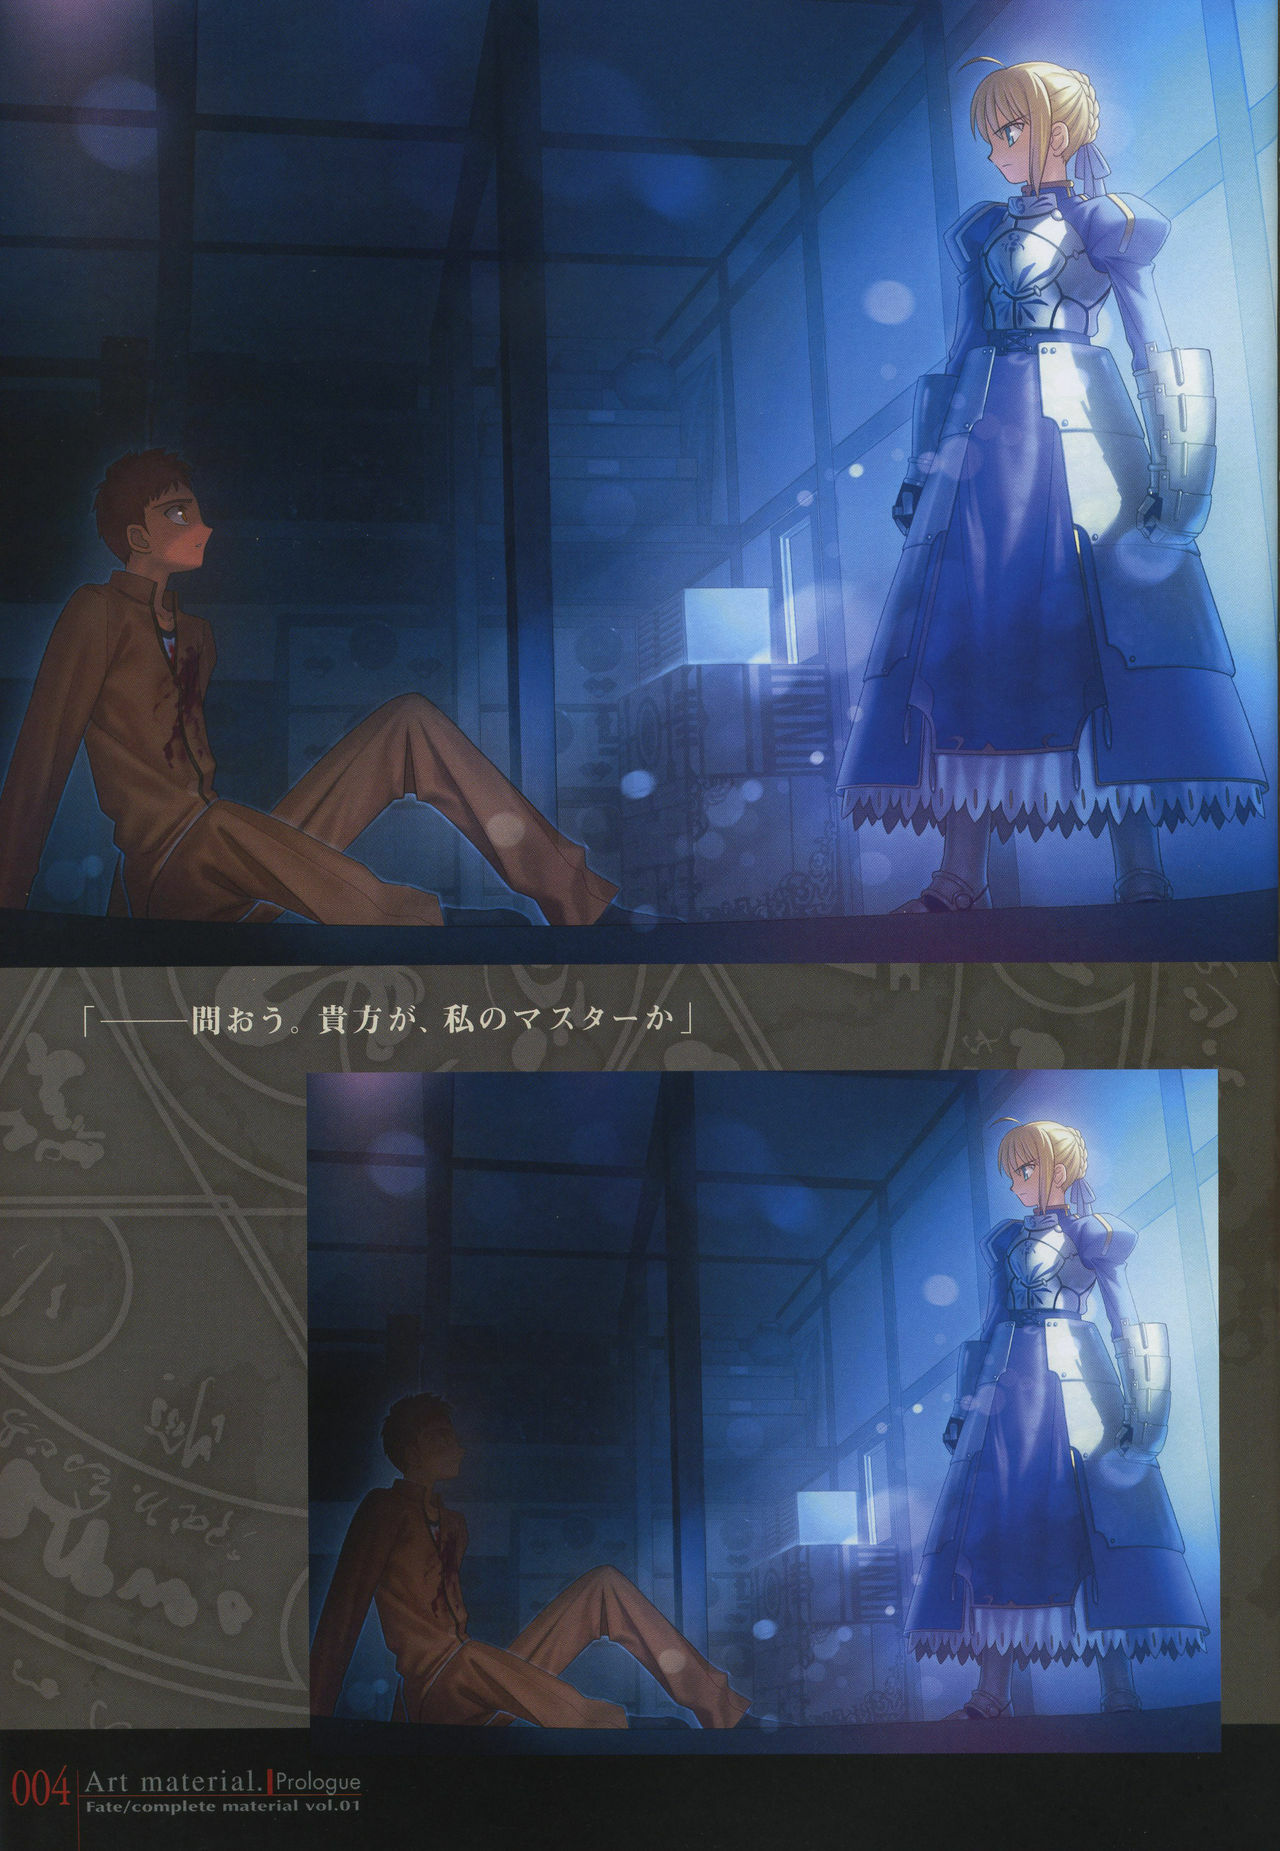 [Type-Moon] Fate/complete material I - Art material. page 9 full